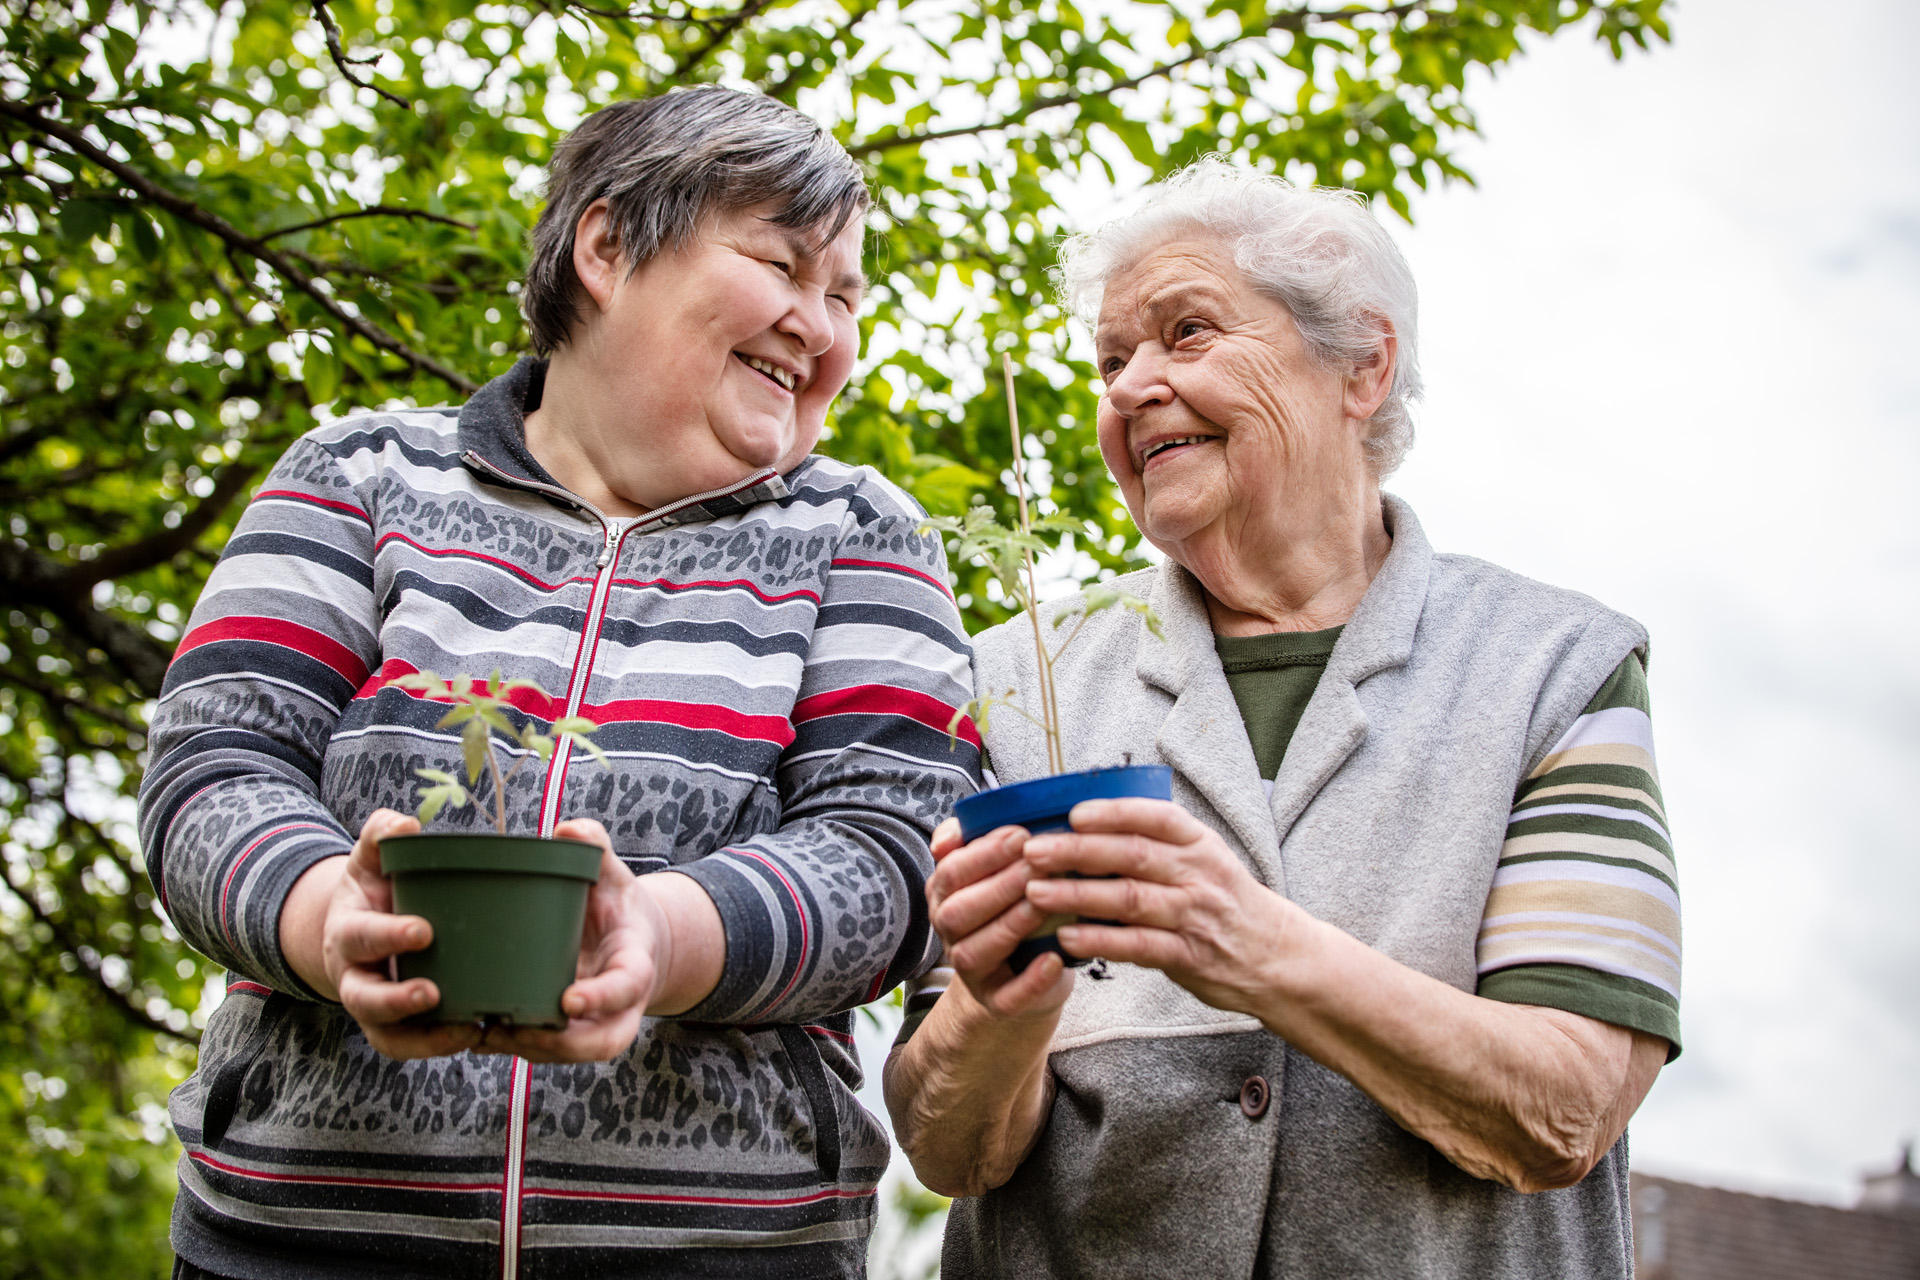 Two smiling older ladies in a garden, both holding seedlings in pots